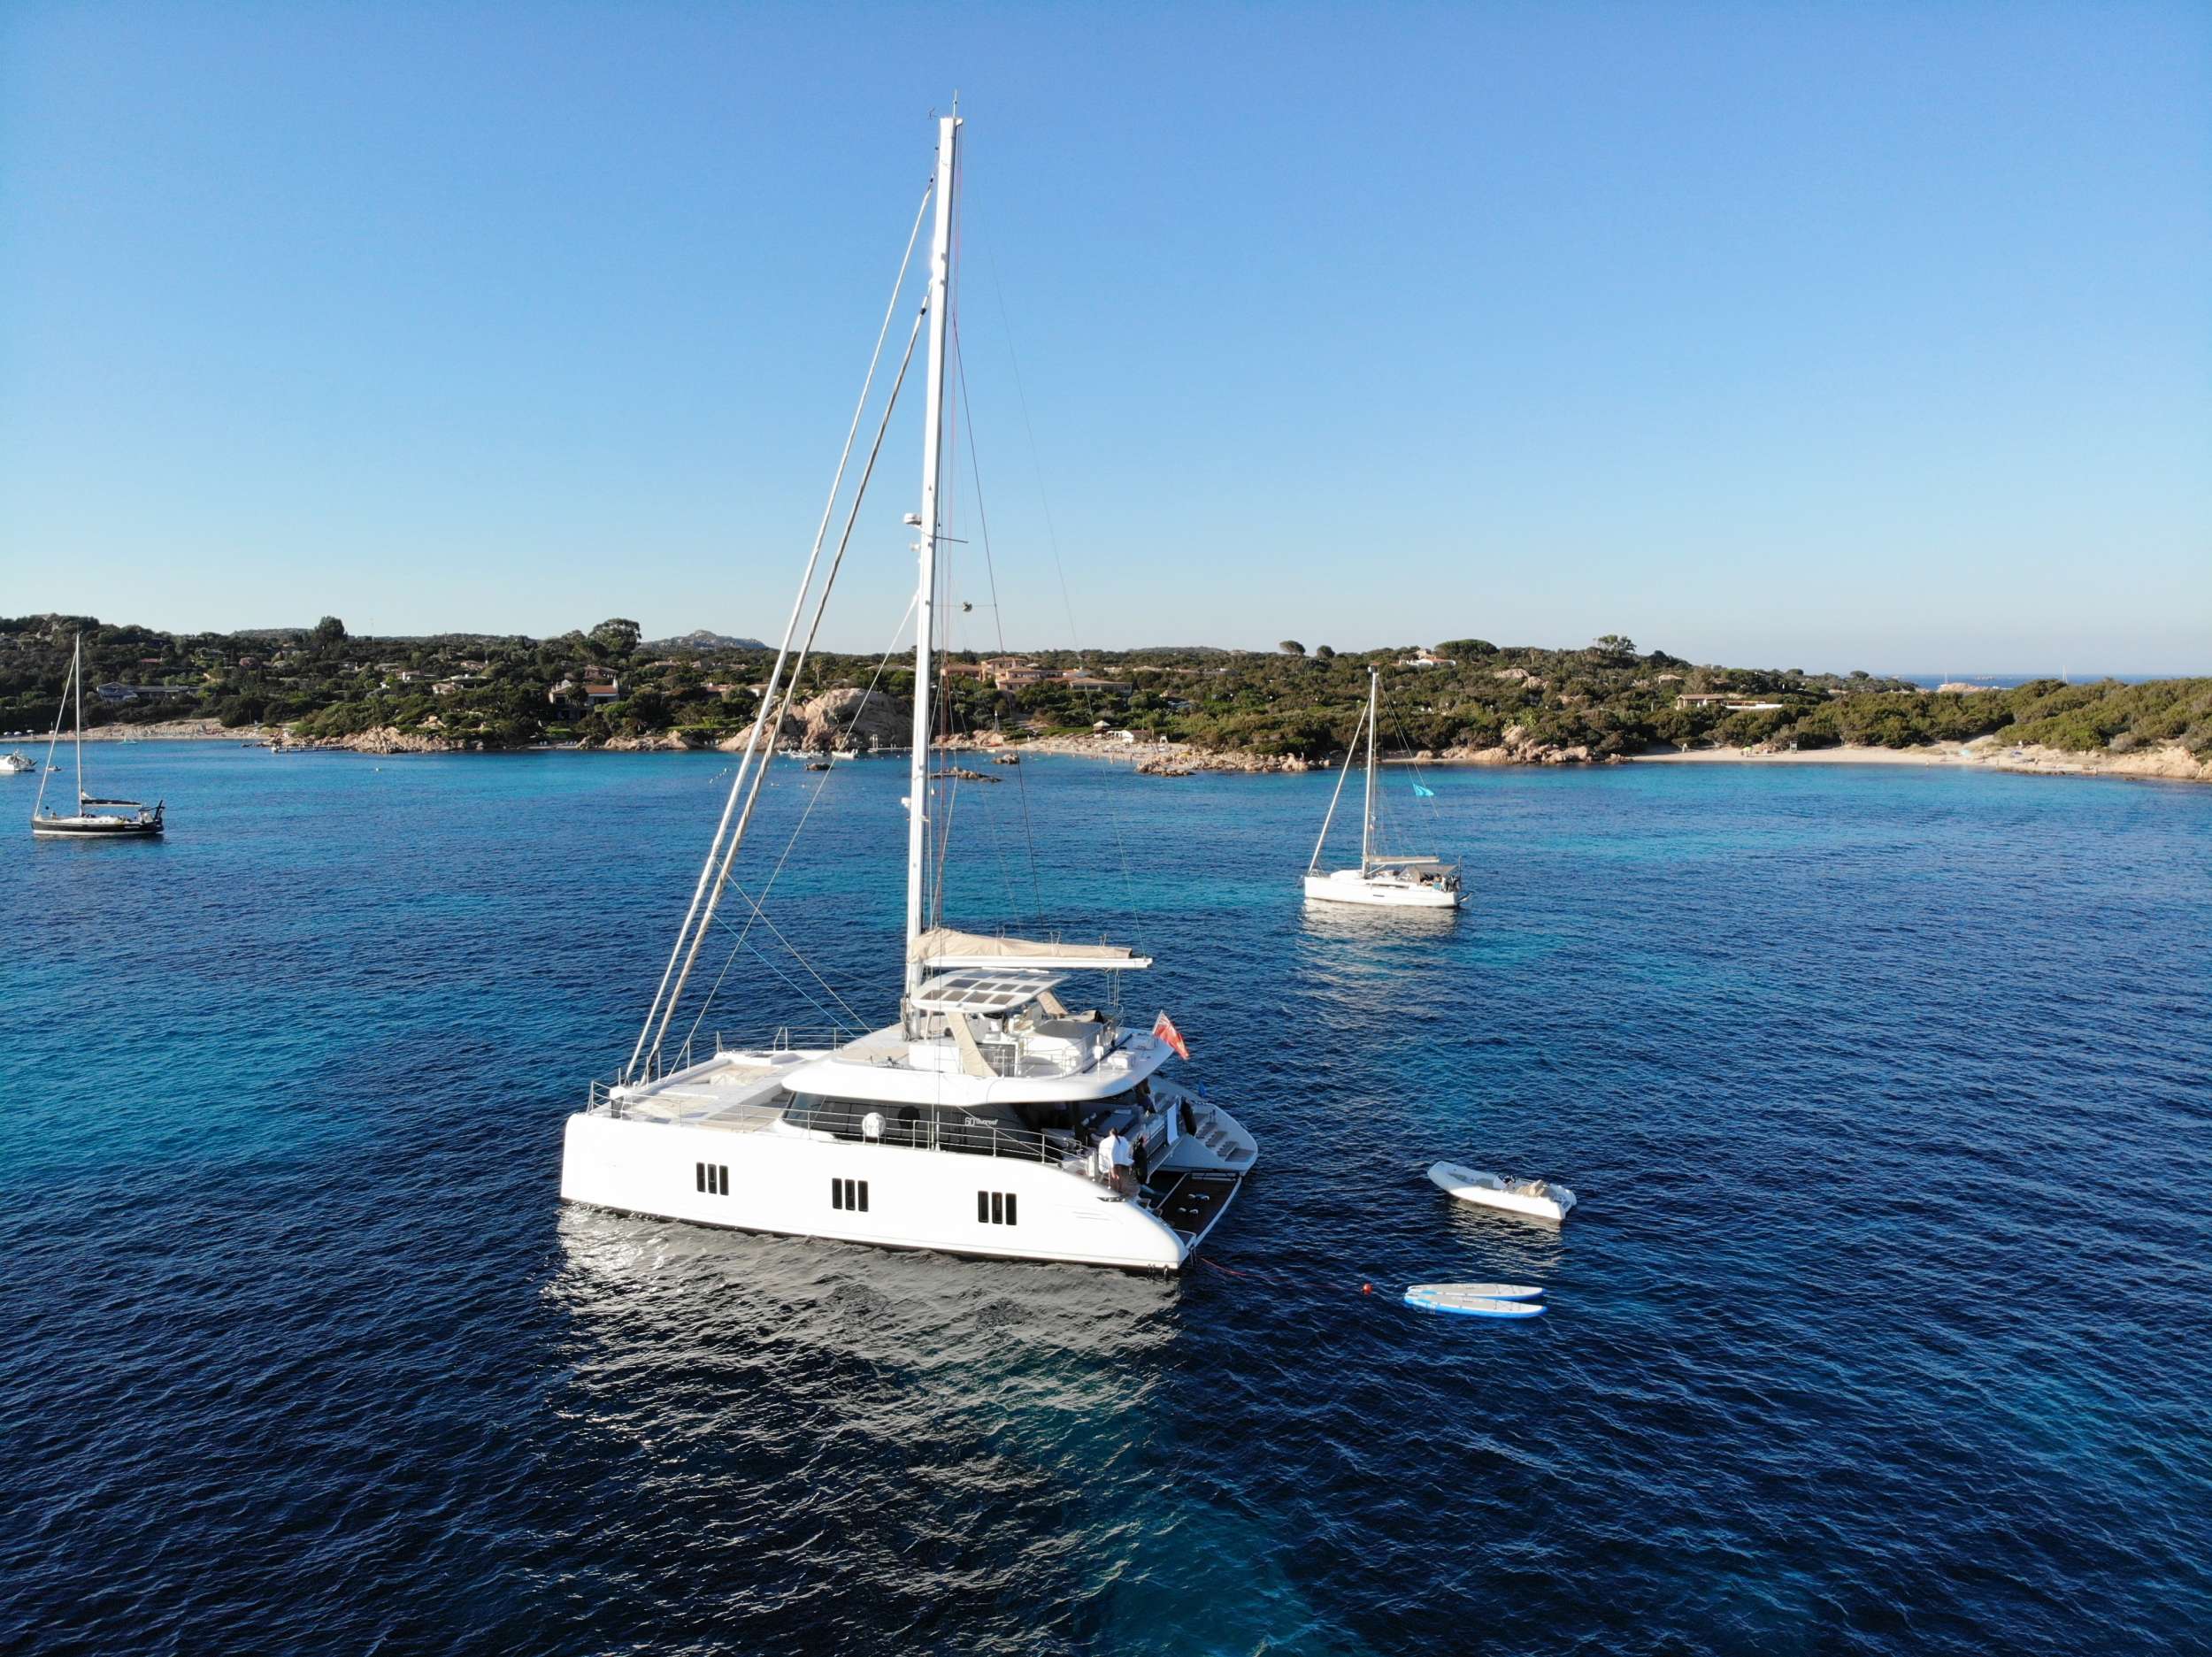 DAWN - Yacht Charter Antibes & Boat hire in Fr. Riviera, Corsica & Sardinia 1